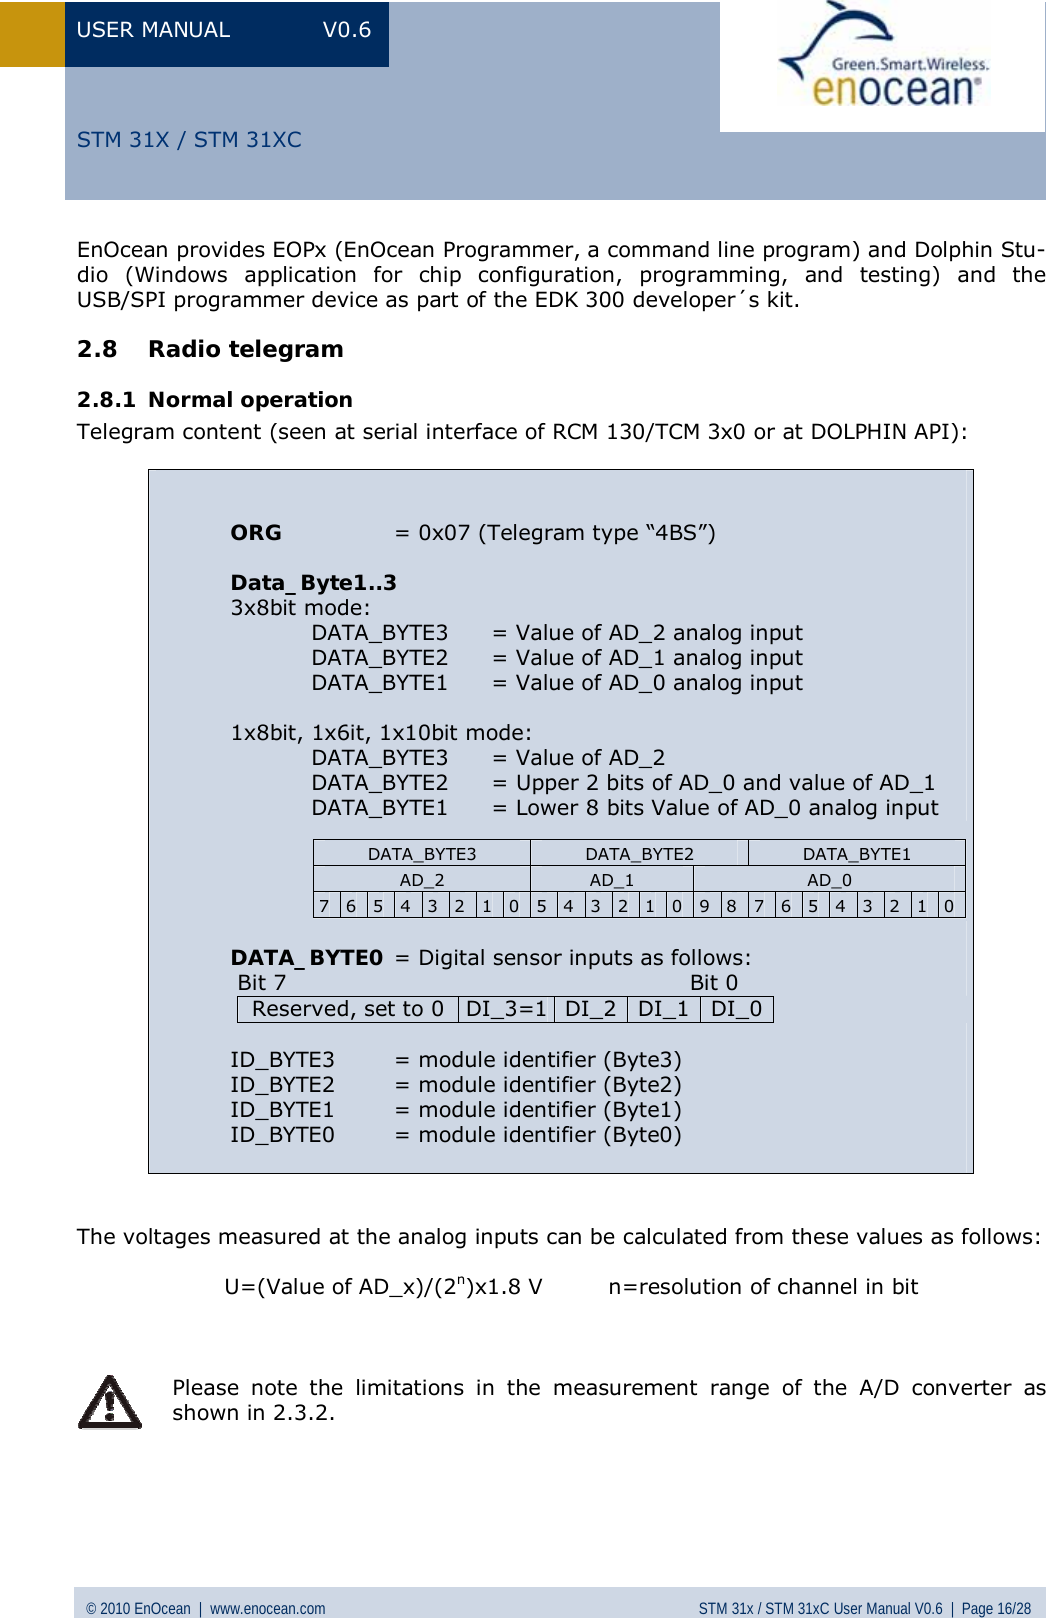 USER MANUAL V0.6 © 2010 EnOcean  |  www.enocean.com STM 31x / STM 31xC User Manual V0.6  |  Page 16/28  STM 31X / STM 31XCEnOcean provides EOPx (EnOcean Programmer, a command line program) and Dolphin Stu-dio (Windows application for chip configuration, programming, and testing) and the USB/SPI programmer device as part of the EDK 300 developer´s kit. 2.8 Radio telegram 2.8.1 Normal operation Telegram content (seen at serial interface of RCM 130/TCM 3x0 or at DOLPHIN API):        ORG  = 0x07 (Telegram type “4BS”)  Data_Byte1..3 3x8bit mode:  DATA_BYTE3  = Value of AD_2 analog input  DATA_BYTE2  = Value of AD_1 analog input  DATA_BYTE1  = Value of AD_0 analog input  1x8bit, 1x6it, 1x10bit mode:  DATA_BYTE3  = Value of AD_2  DATA_BYTE2  = Upper 2 bits of AD_0 and value of AD_1  DATA_BYTE1  = Lower 8 bits Value of AD_0 analog input      DATA_BYTE0 = Digital sensor inputs as follows:  Bit 7                                                       Bit 0 Reserved, set to 0  DI_3=1 DI_2 DI_1 DI_0 ID_BYTE3  = module identifier (Byte3) ID_BYTE2  = module identifier (Byte2) ID_BYTE1  = module identifier (Byte1) ID_BYTE0  = module identifier (Byte0)  DATA_BYTE3  DATA_BYTE2  DATA_BYTE1 AD_2  AD_1  AD_0 7  6  5  4  3  2  1  0  5  4  3  2  1  0  9  8  7  6  5  4  3  2  1  0   The voltages measured at the analog inputs can be calculated from these values as follows:    U=(Value of AD_x)/(2n)x1.8 V         n=resolution of channel in bit     Please note the limitations in the measurement range of the A/D converter as shown in 2.3.2.     